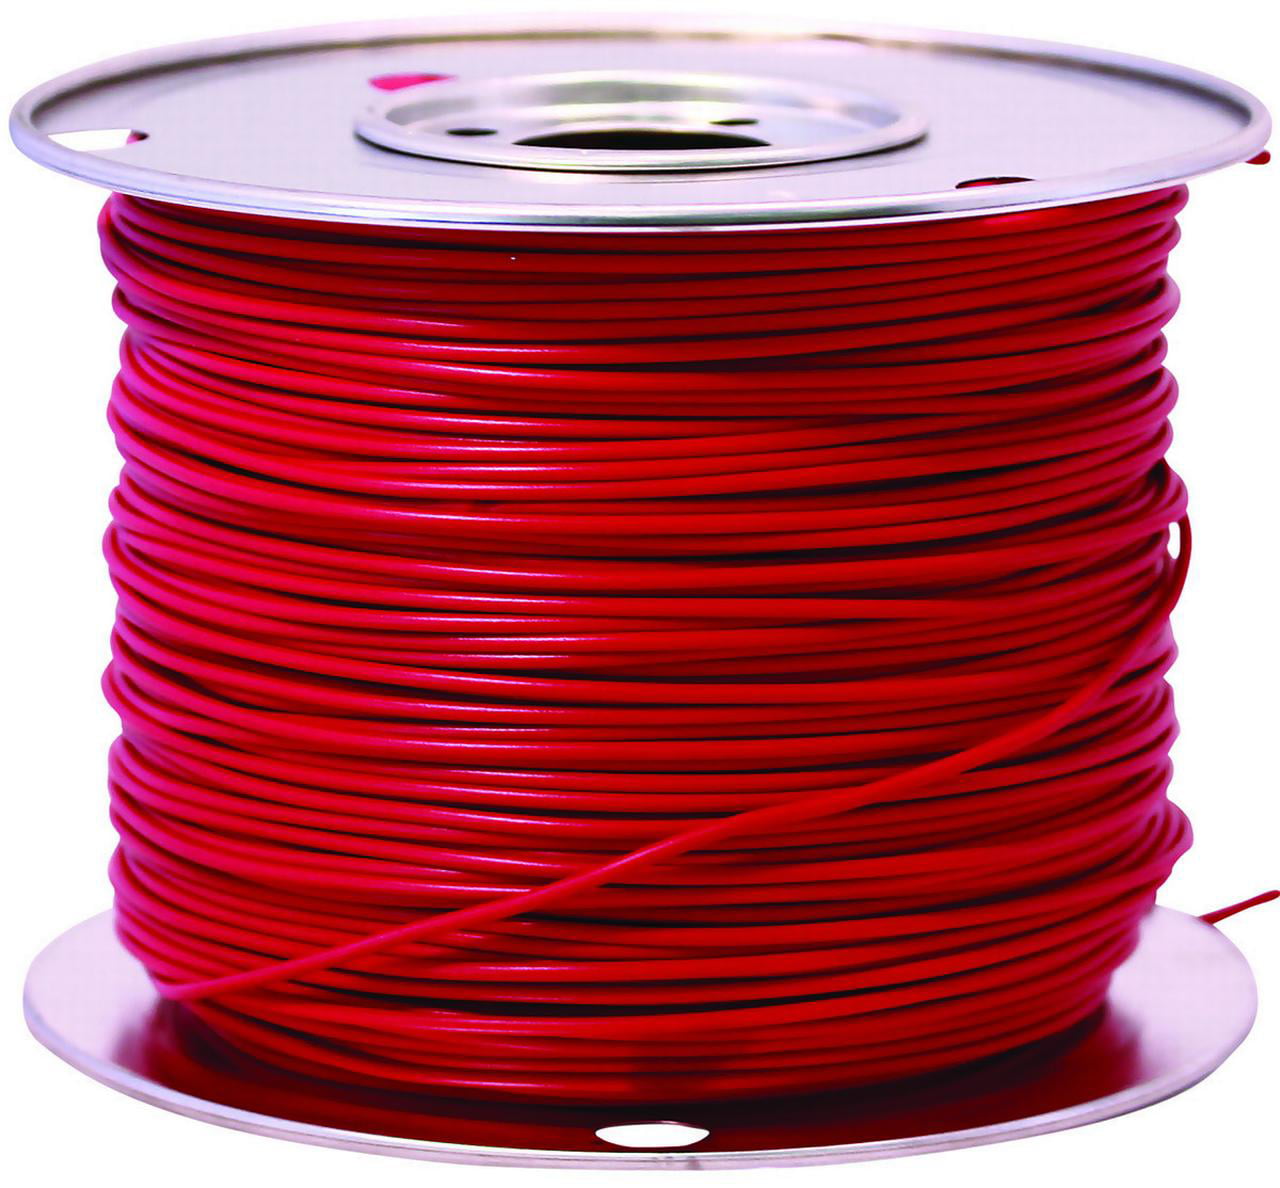 100-Feet 18-Gauge Bulk Spool Red Coleman Cable Southwire 55667423 Primary Wire 